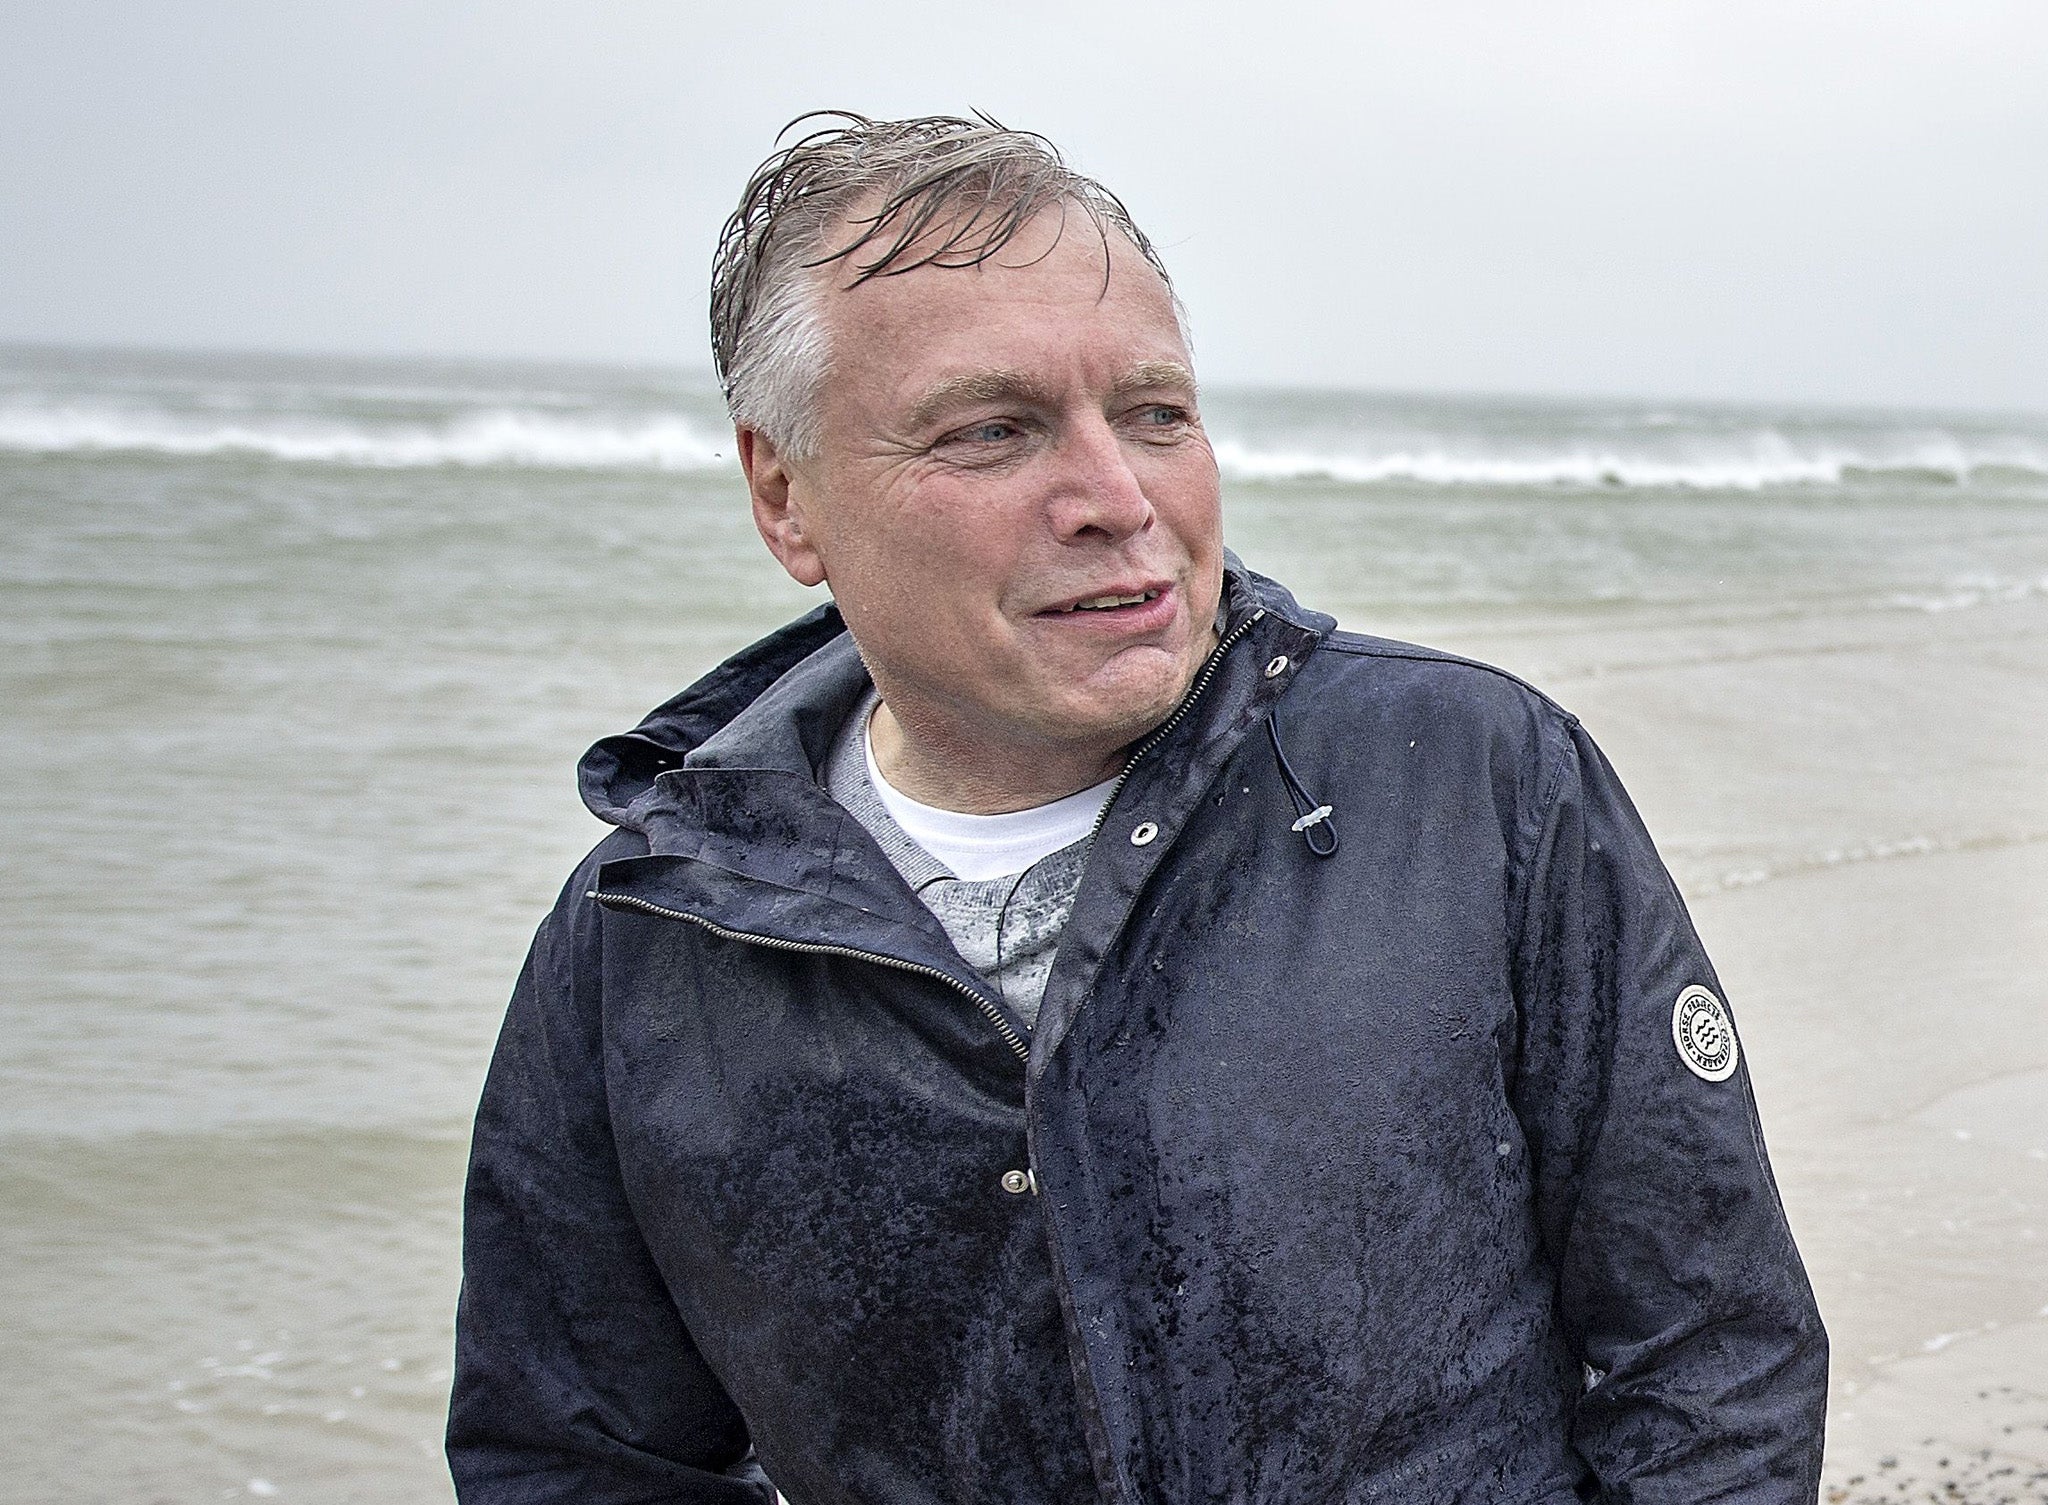 Uffe Elbæk is the leader of the Danish Green Party, the Alternative